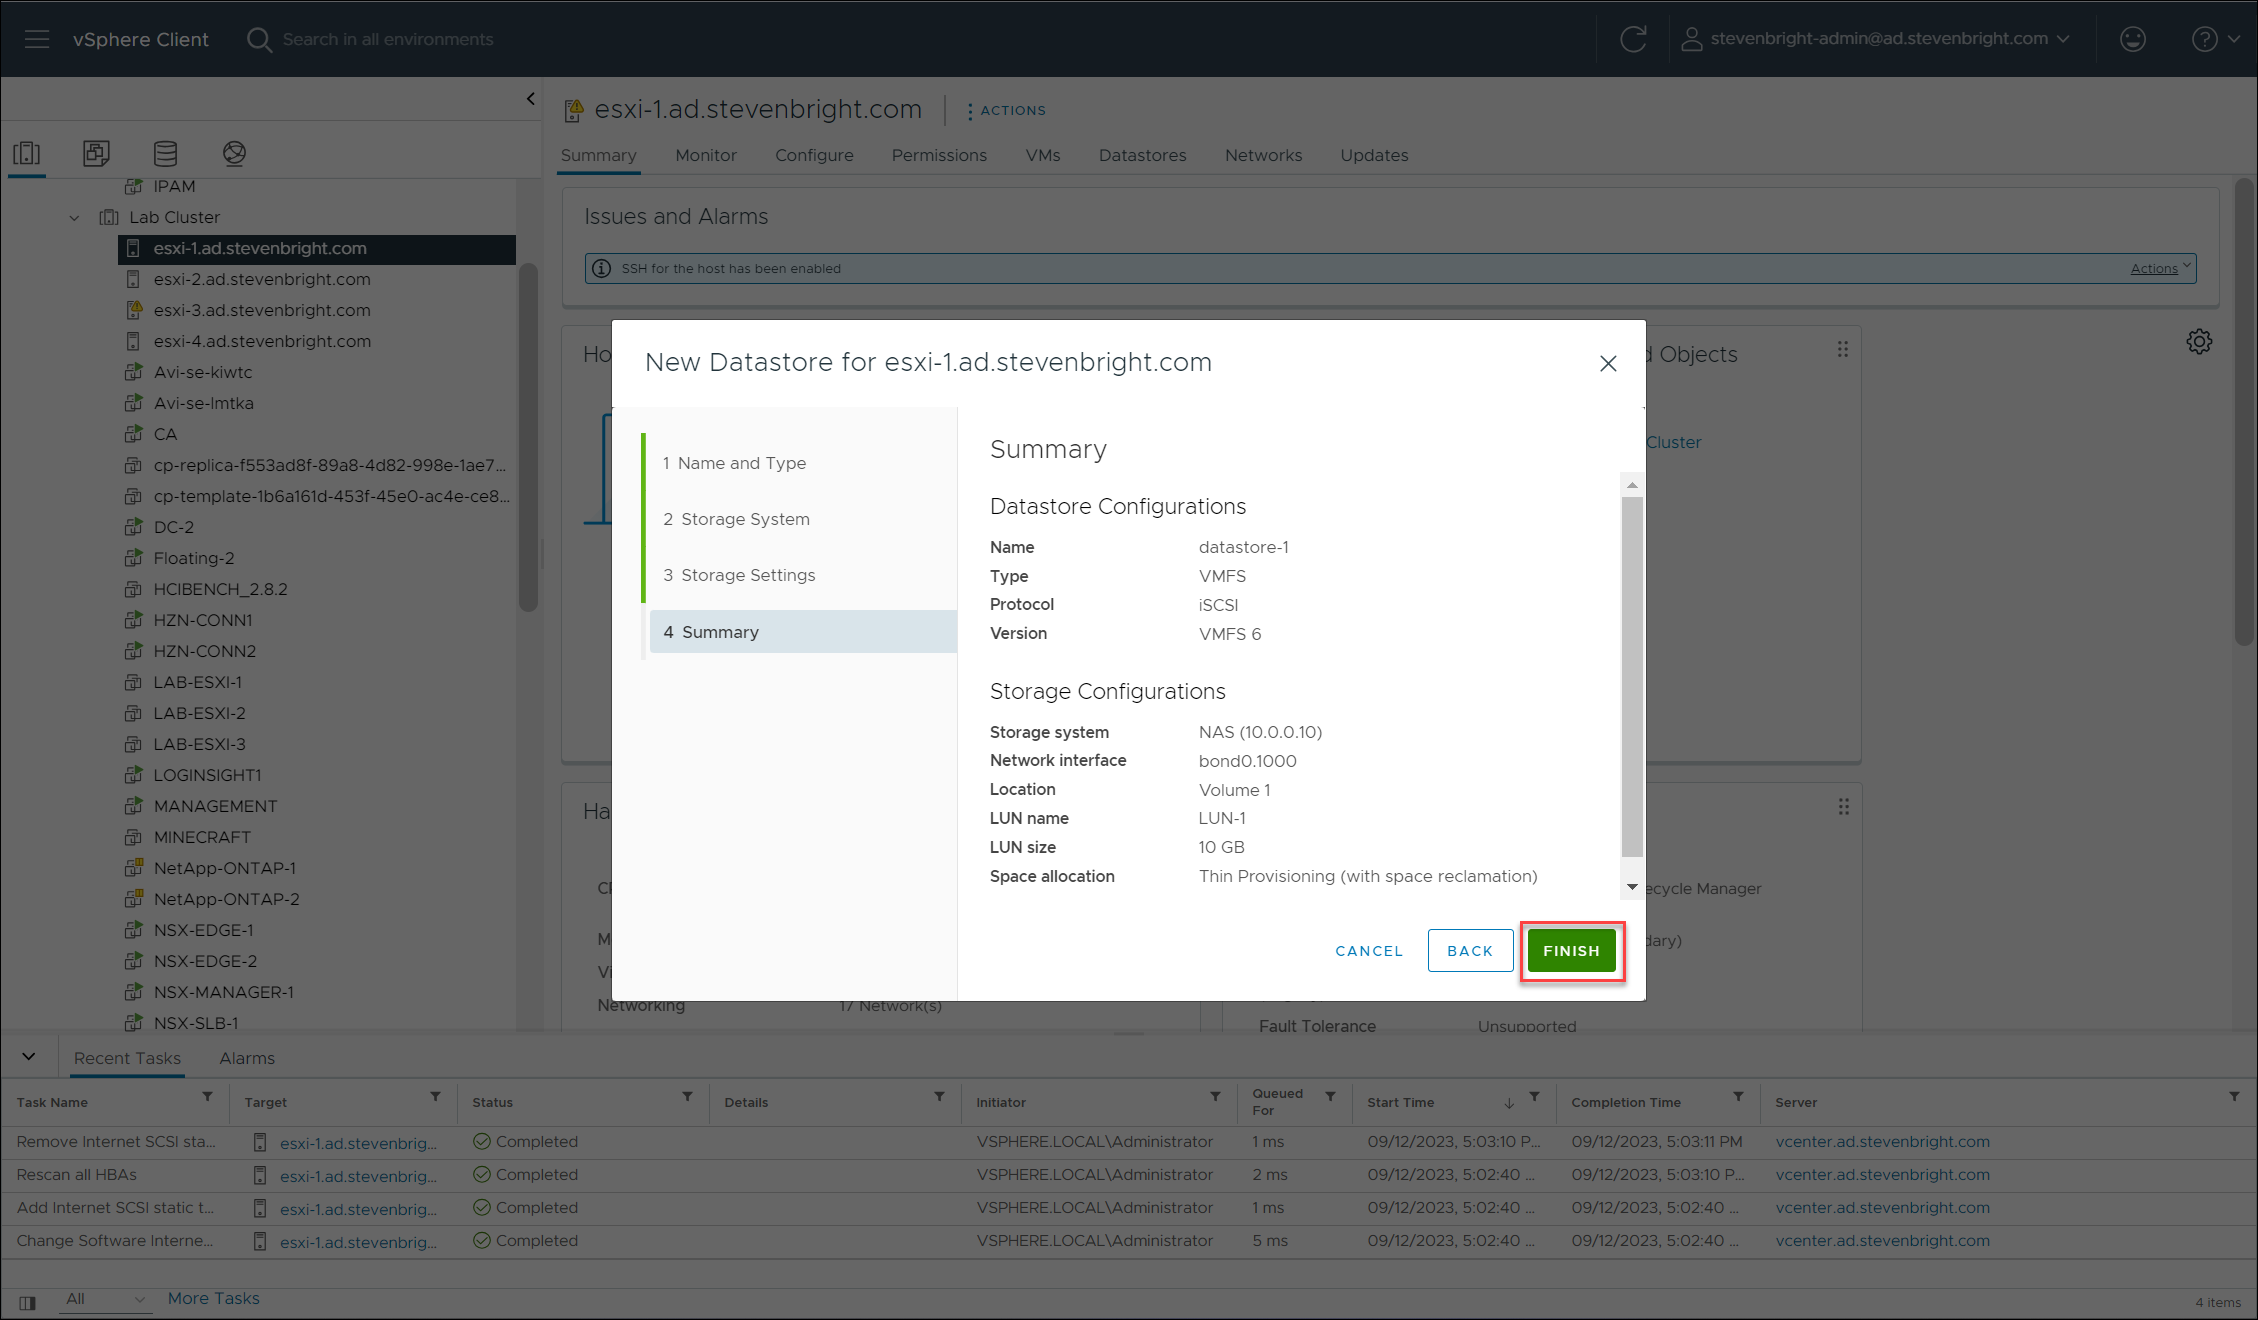 VMware vSphere Client - Synology Storage Console Optimize - New Datastore Wizard - Step 4